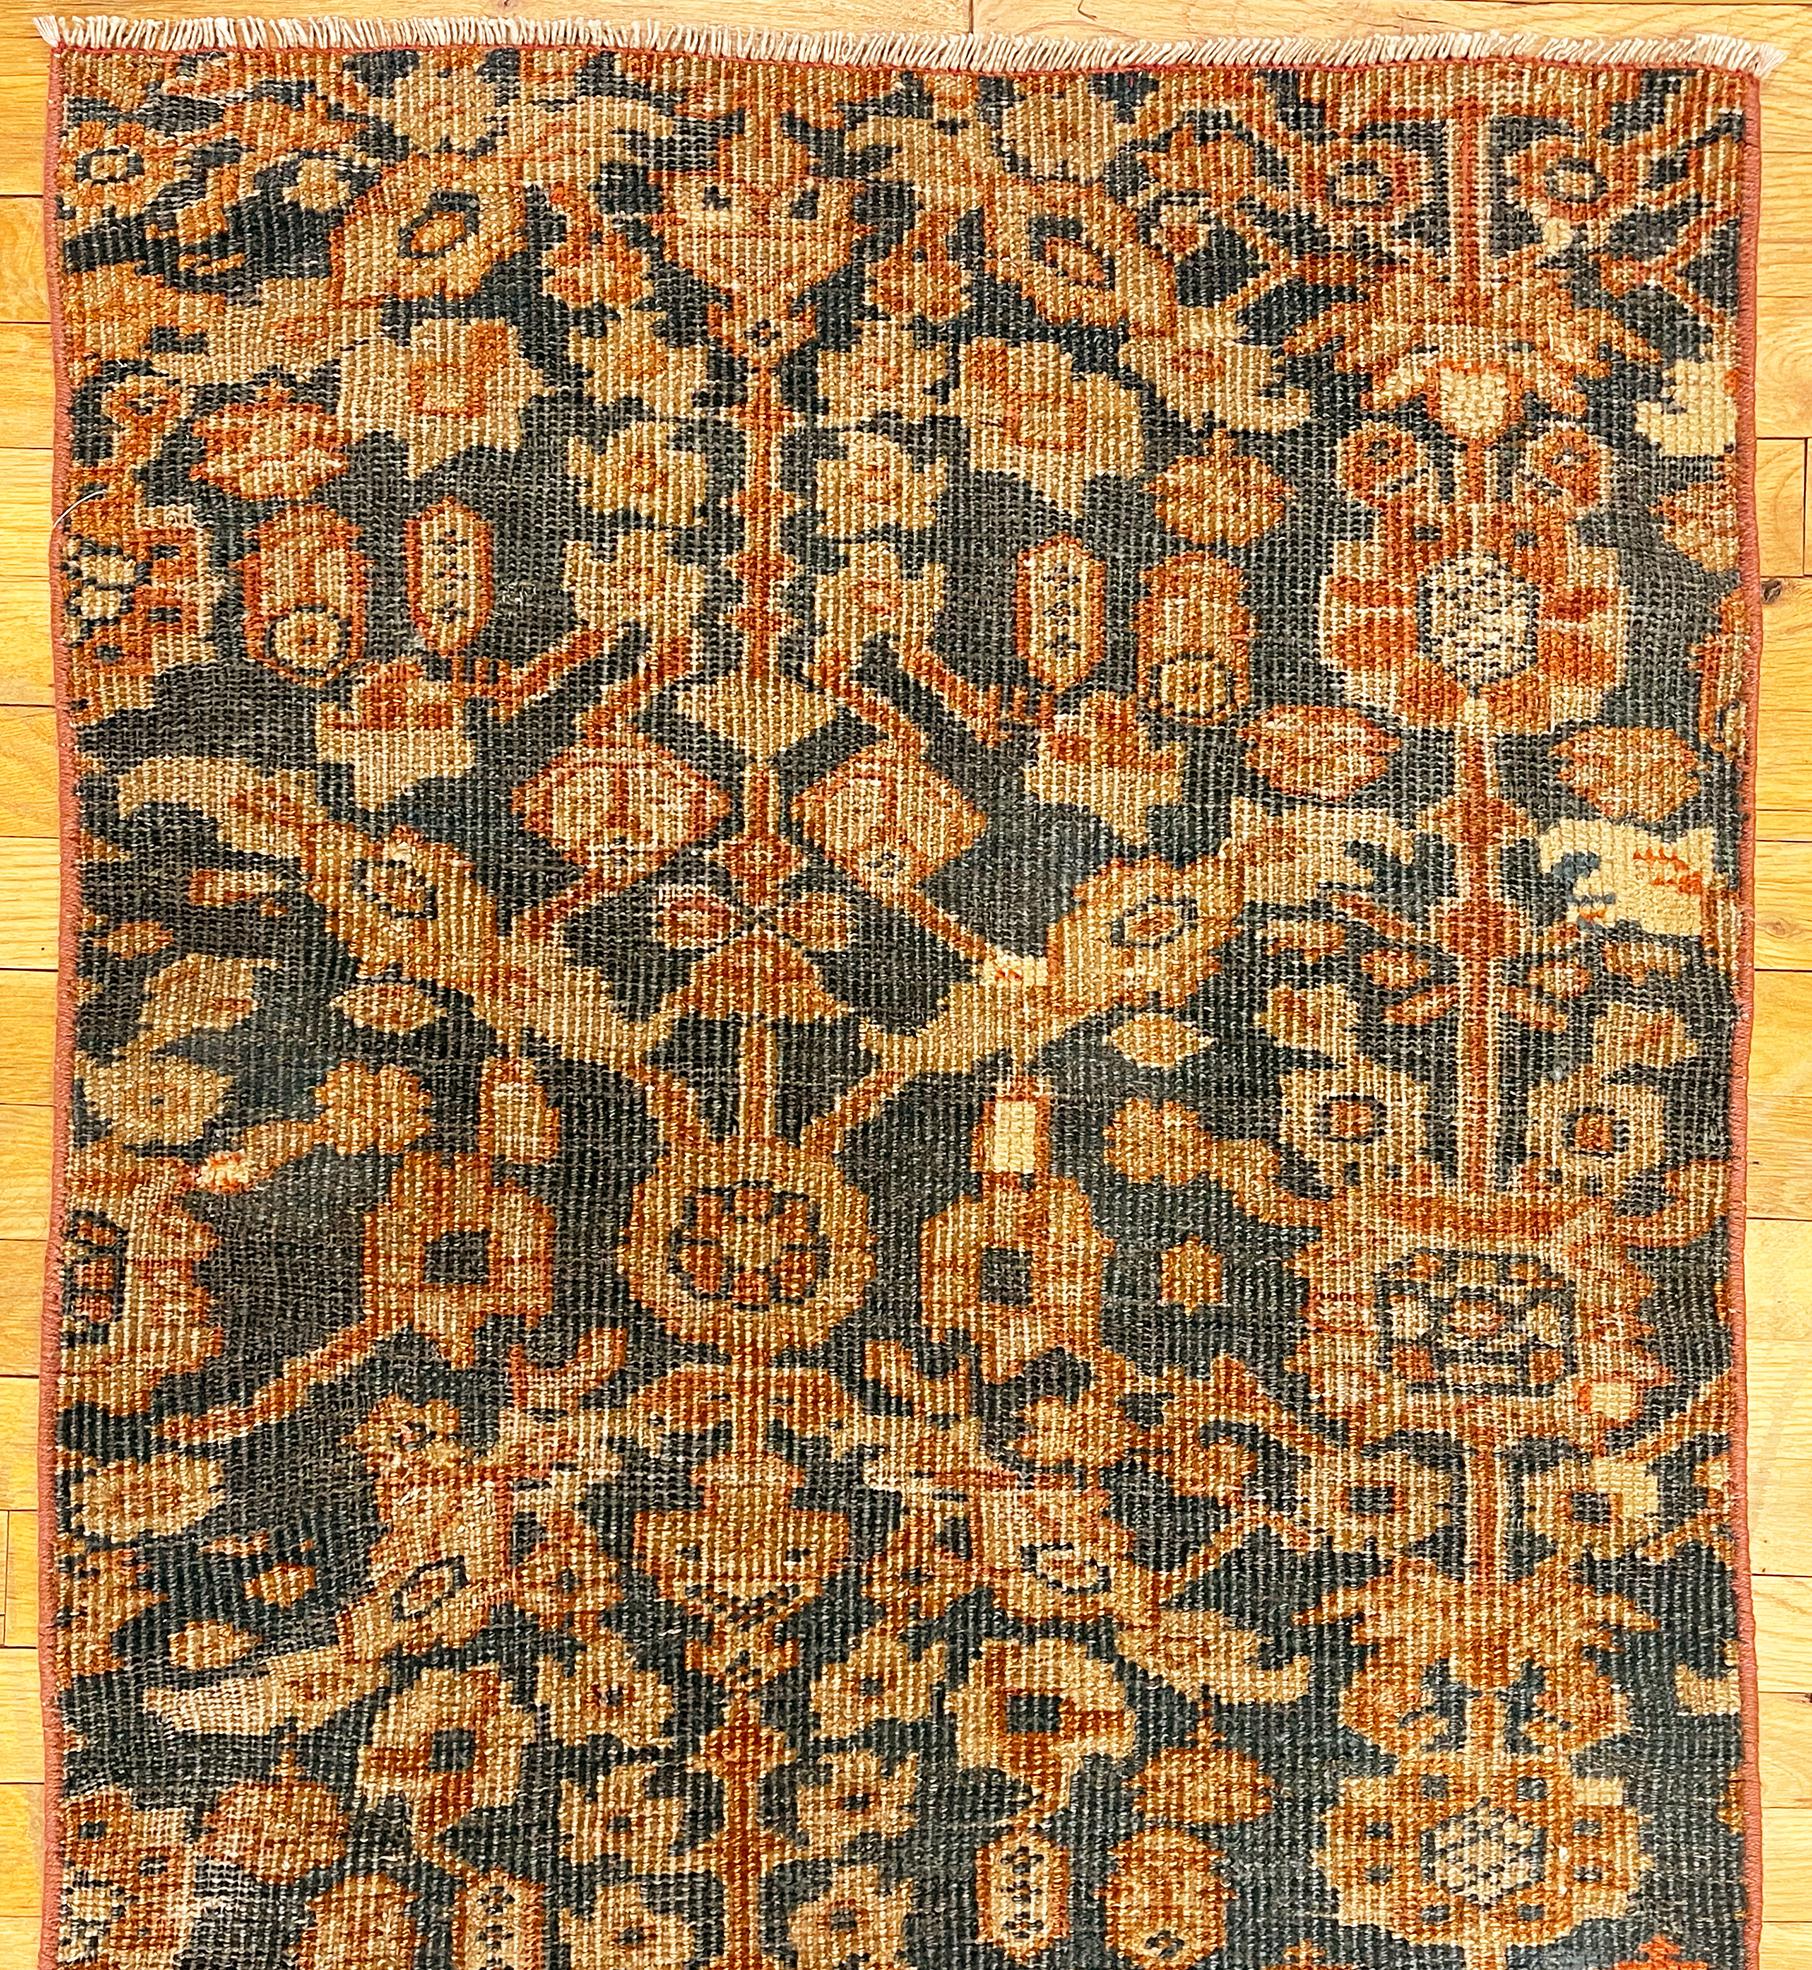 South Asian Antique Persian Borderless Sultananbad Rug, in Runner Size, Blue Field & Repeat For Sale